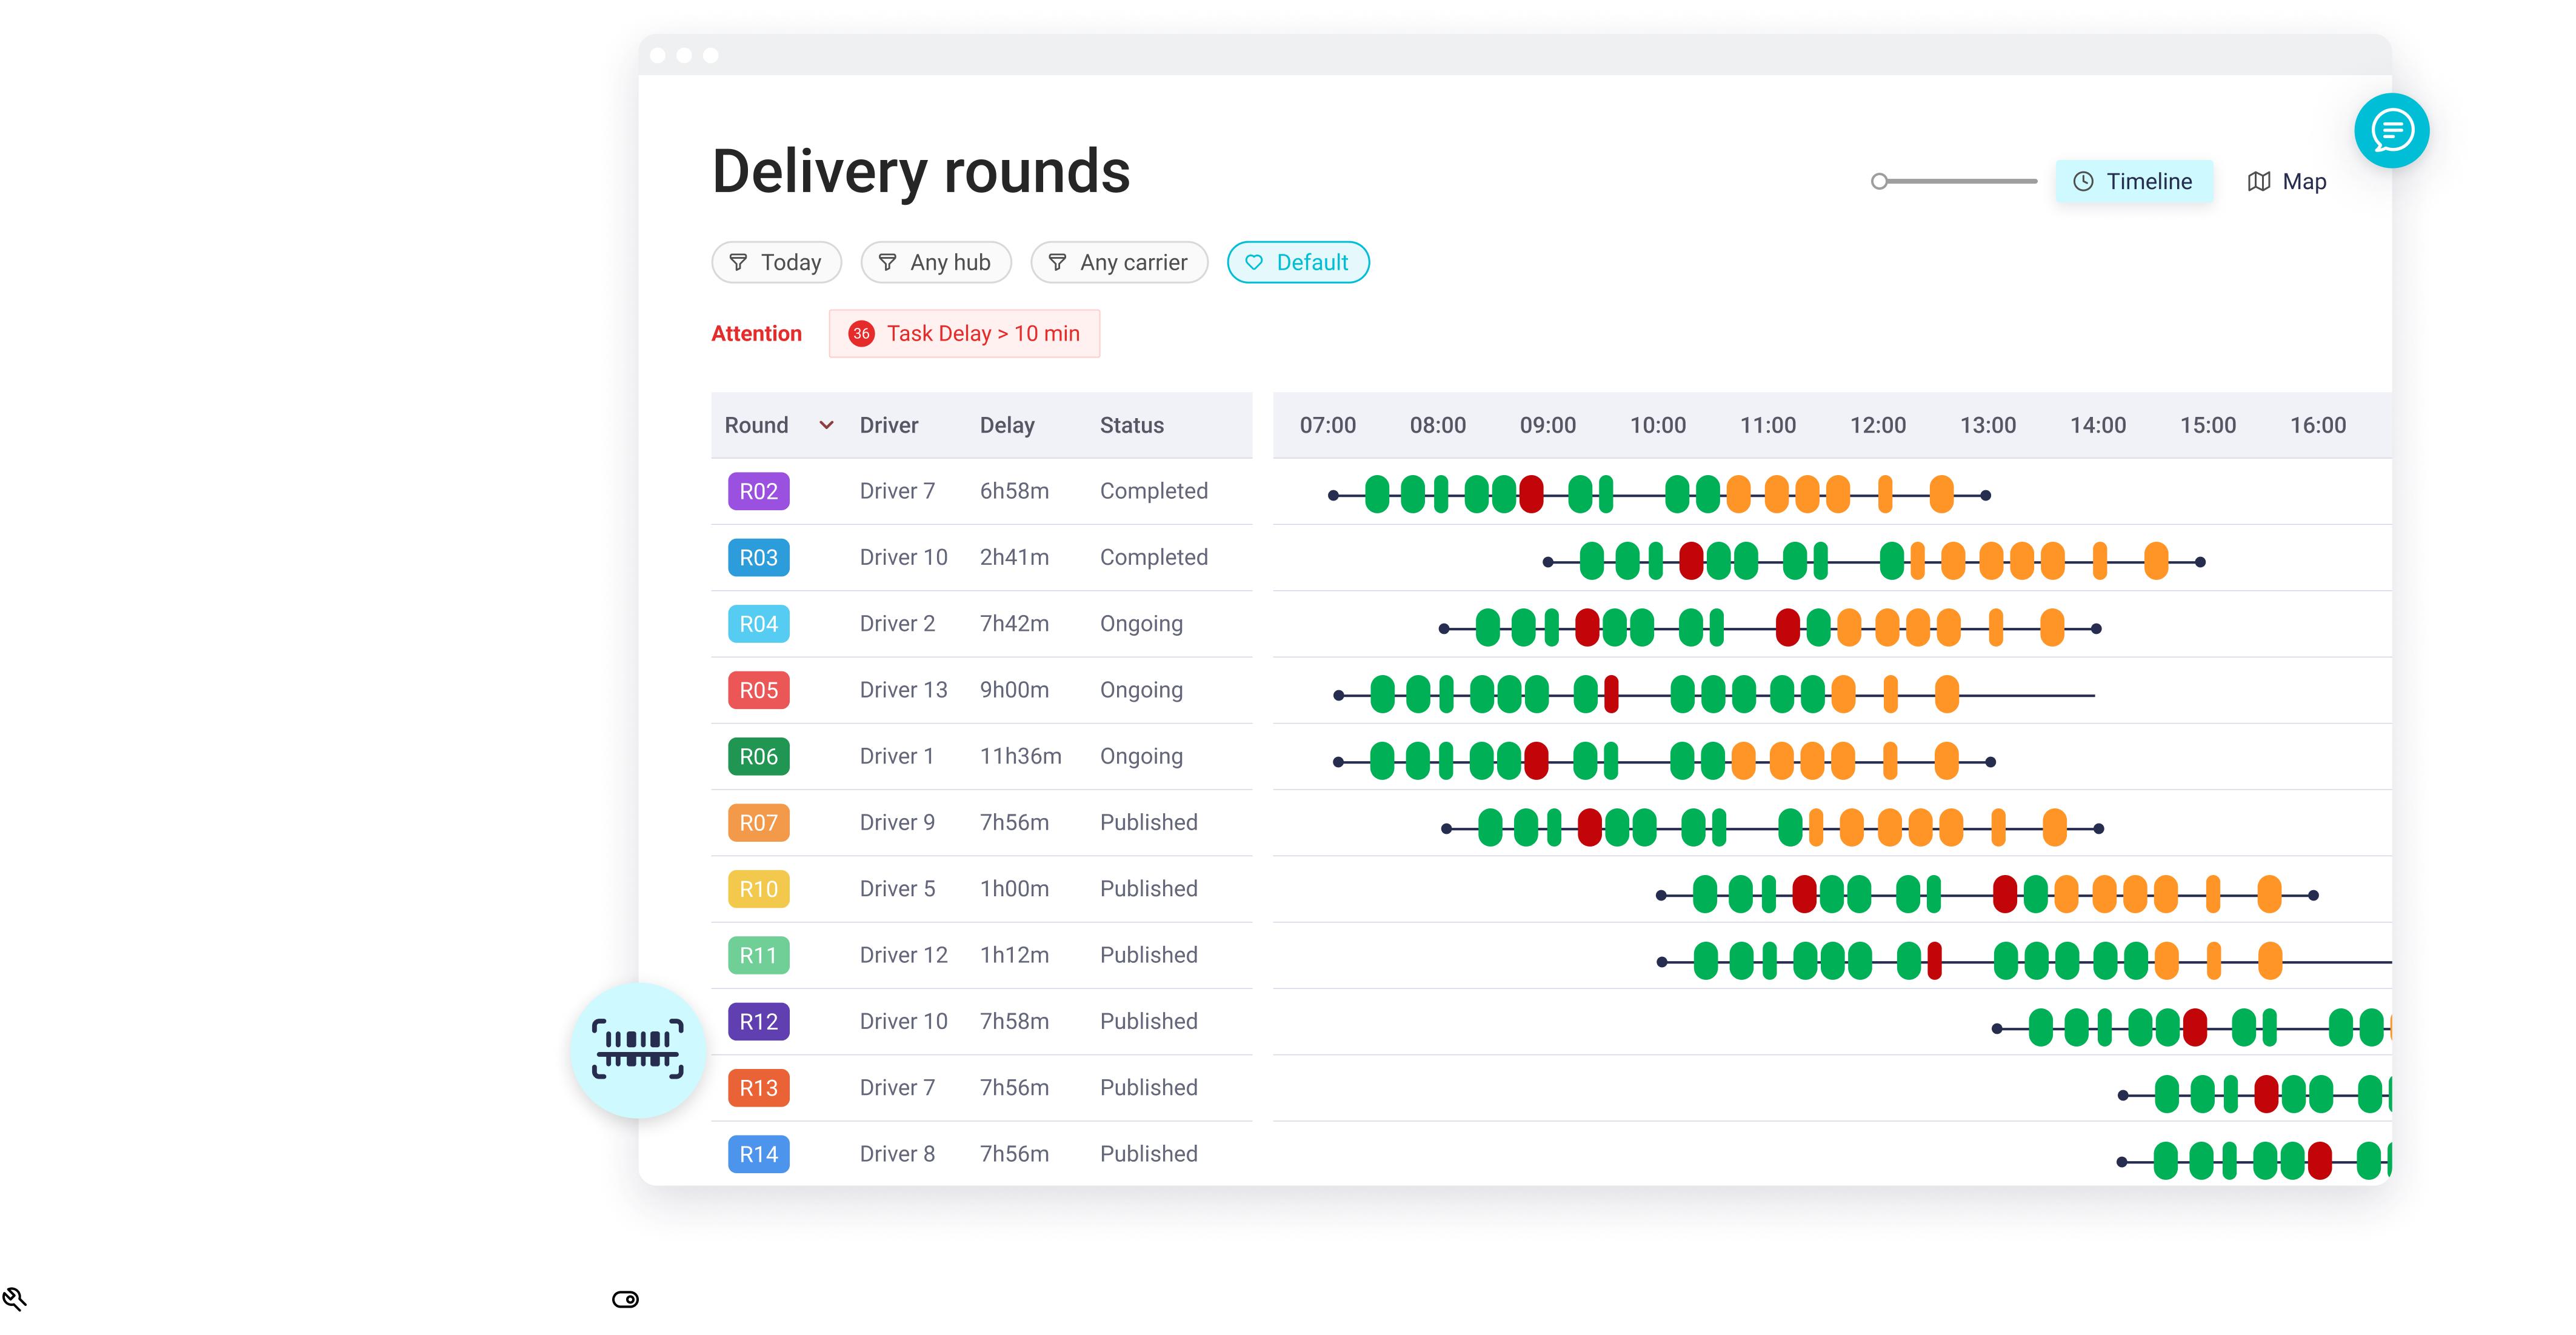 URBANTZ Software - Plan and optimise you delivery rounds across your own, external or mixed fleets to get better cost, smarter routes and lower CO2 emissions.